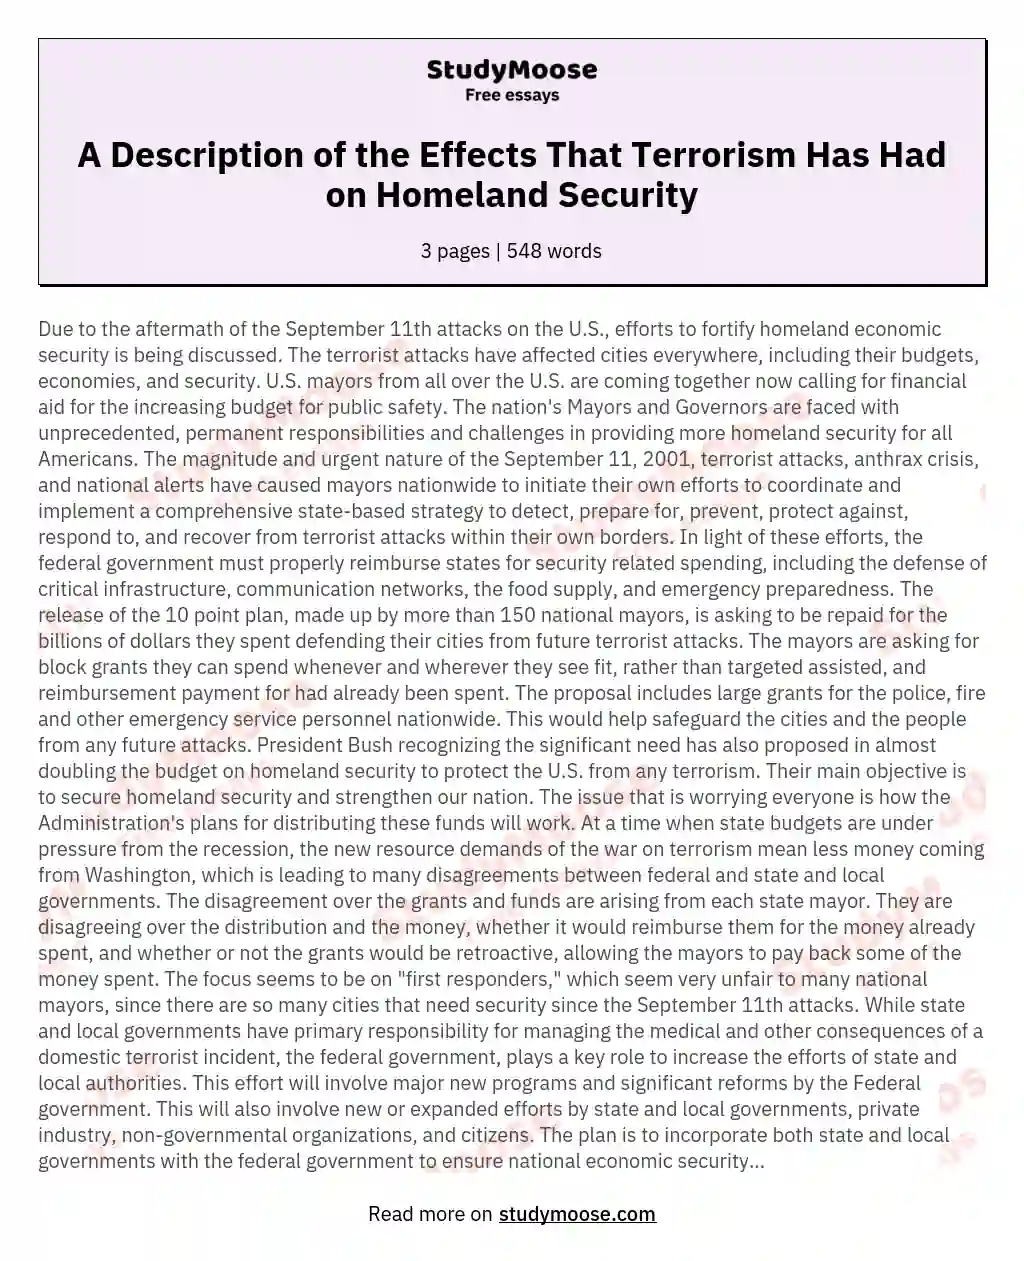 A Description of the Effects That Terrorism Has Had on Homeland Security essay